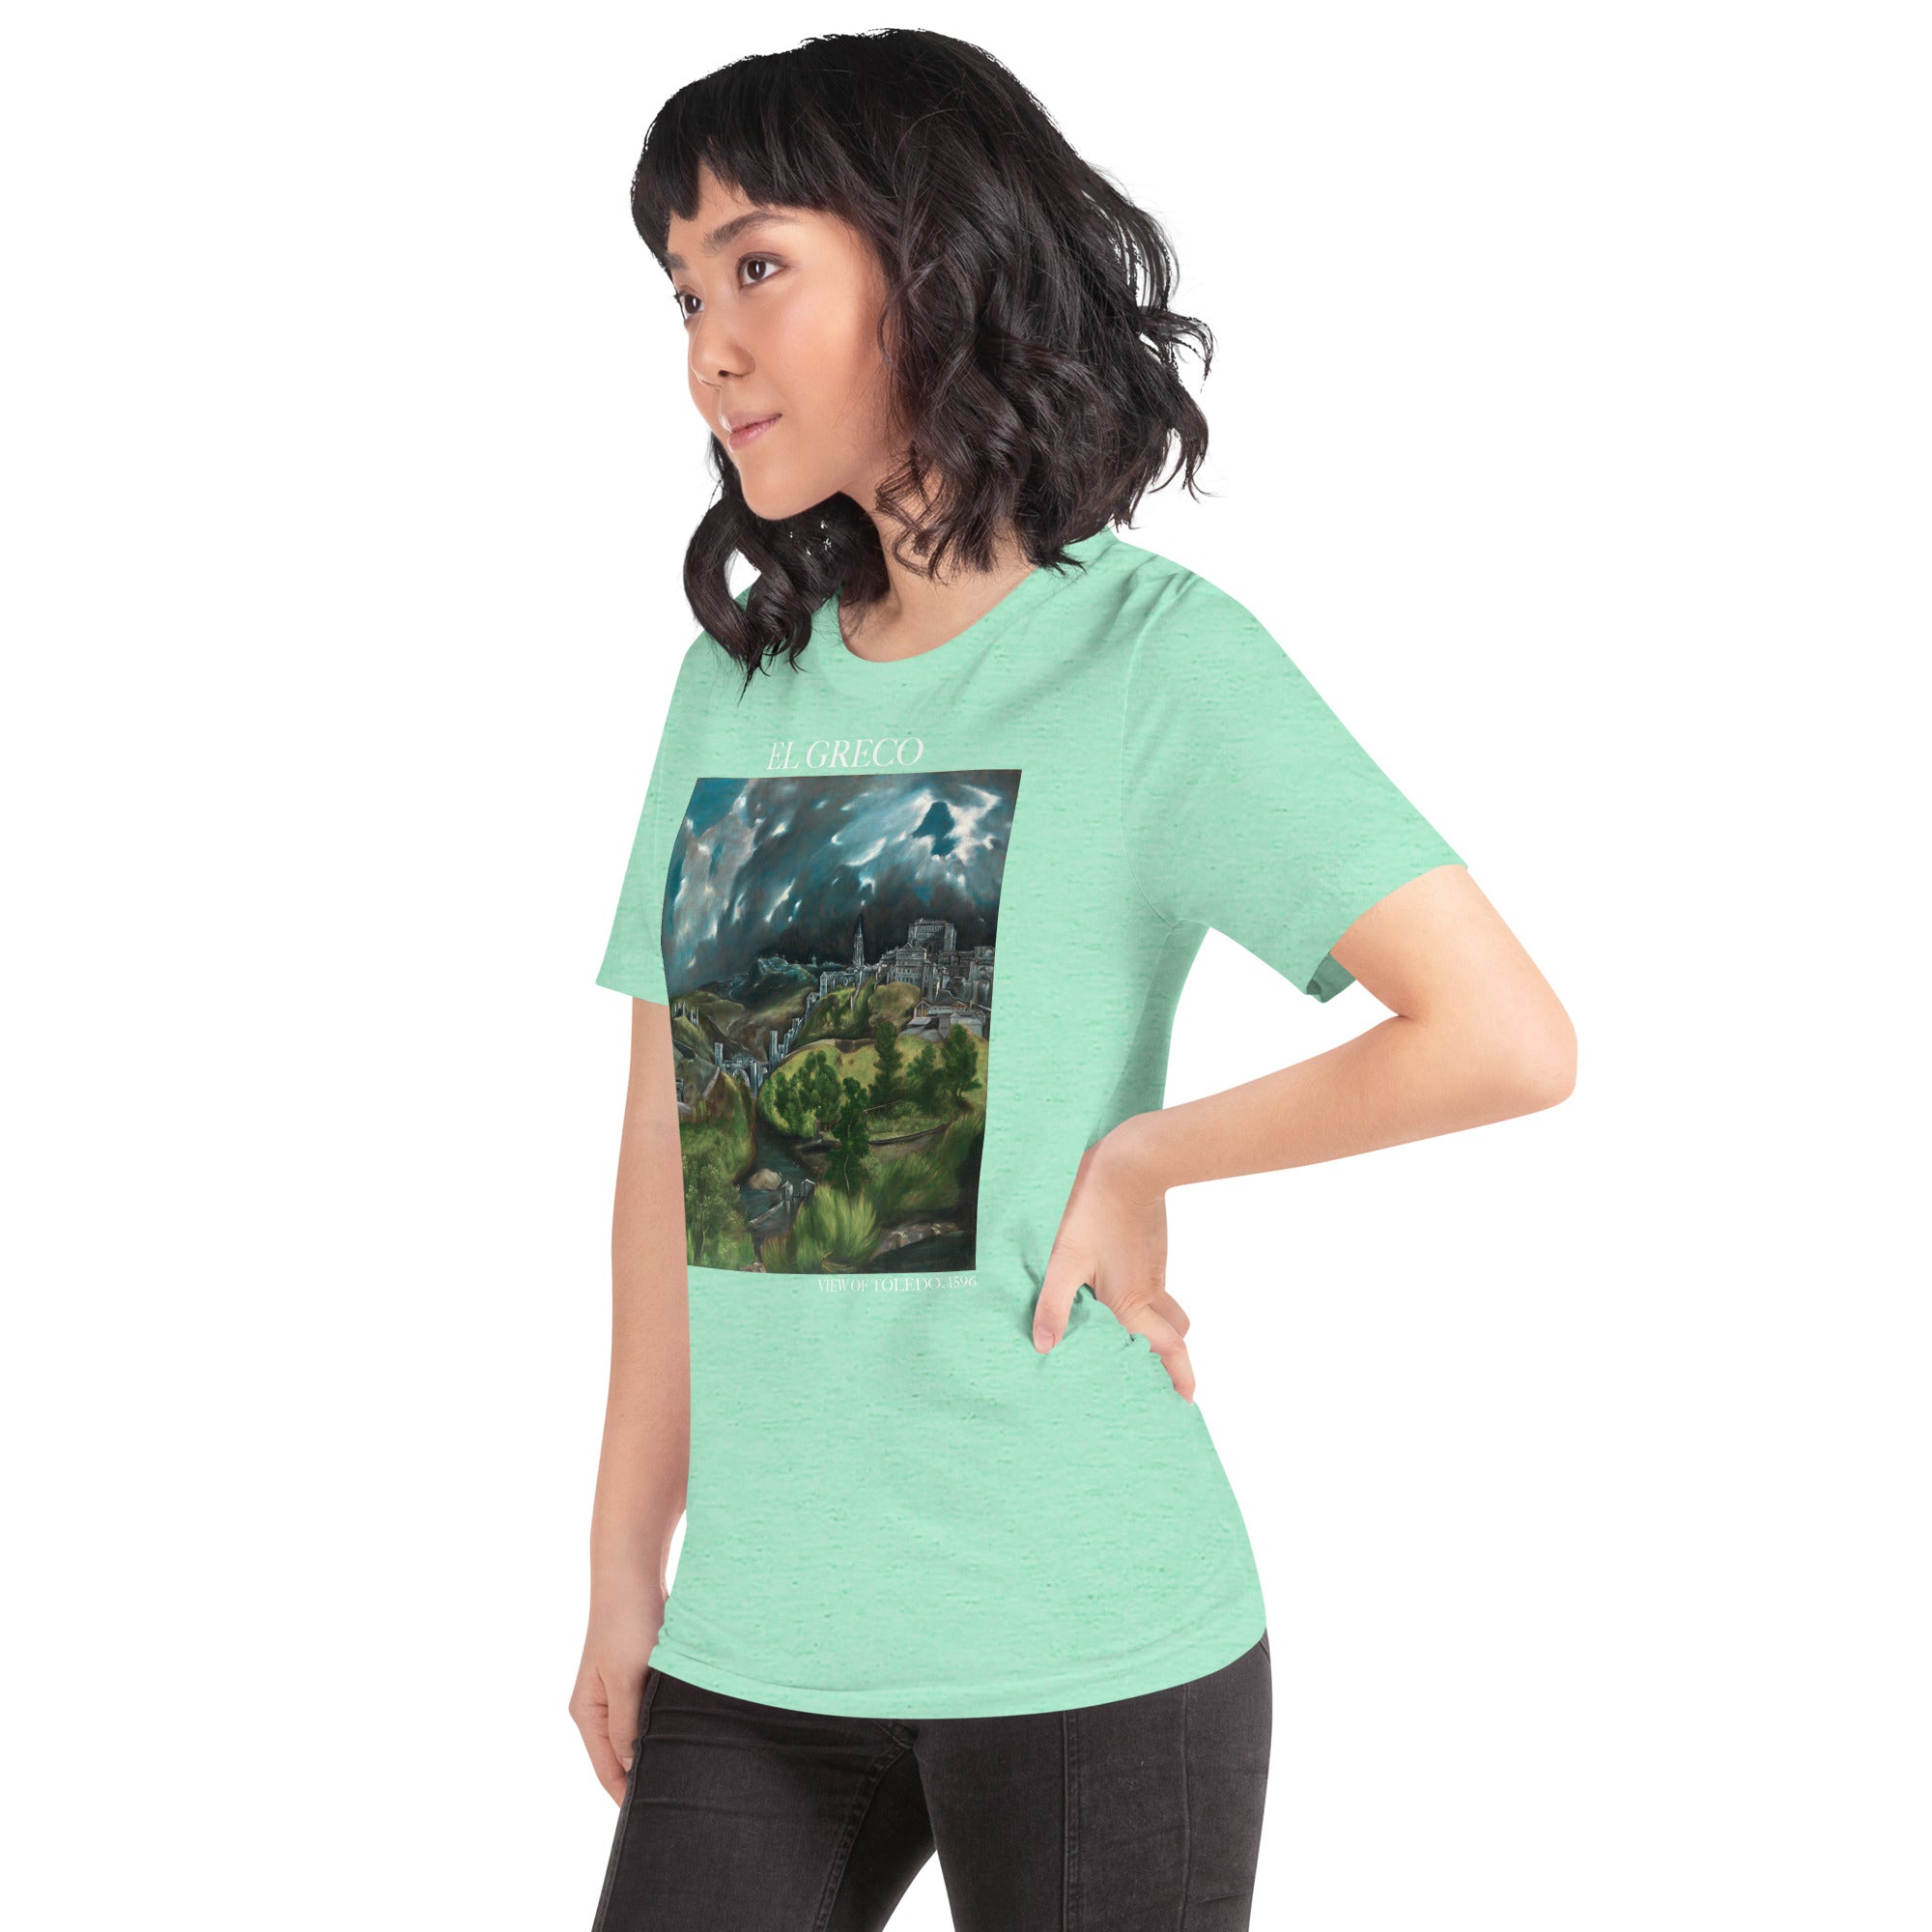 El Greco 'View of Toledo' Famous Painting T-Shirt | Unisex Classic Art Tee